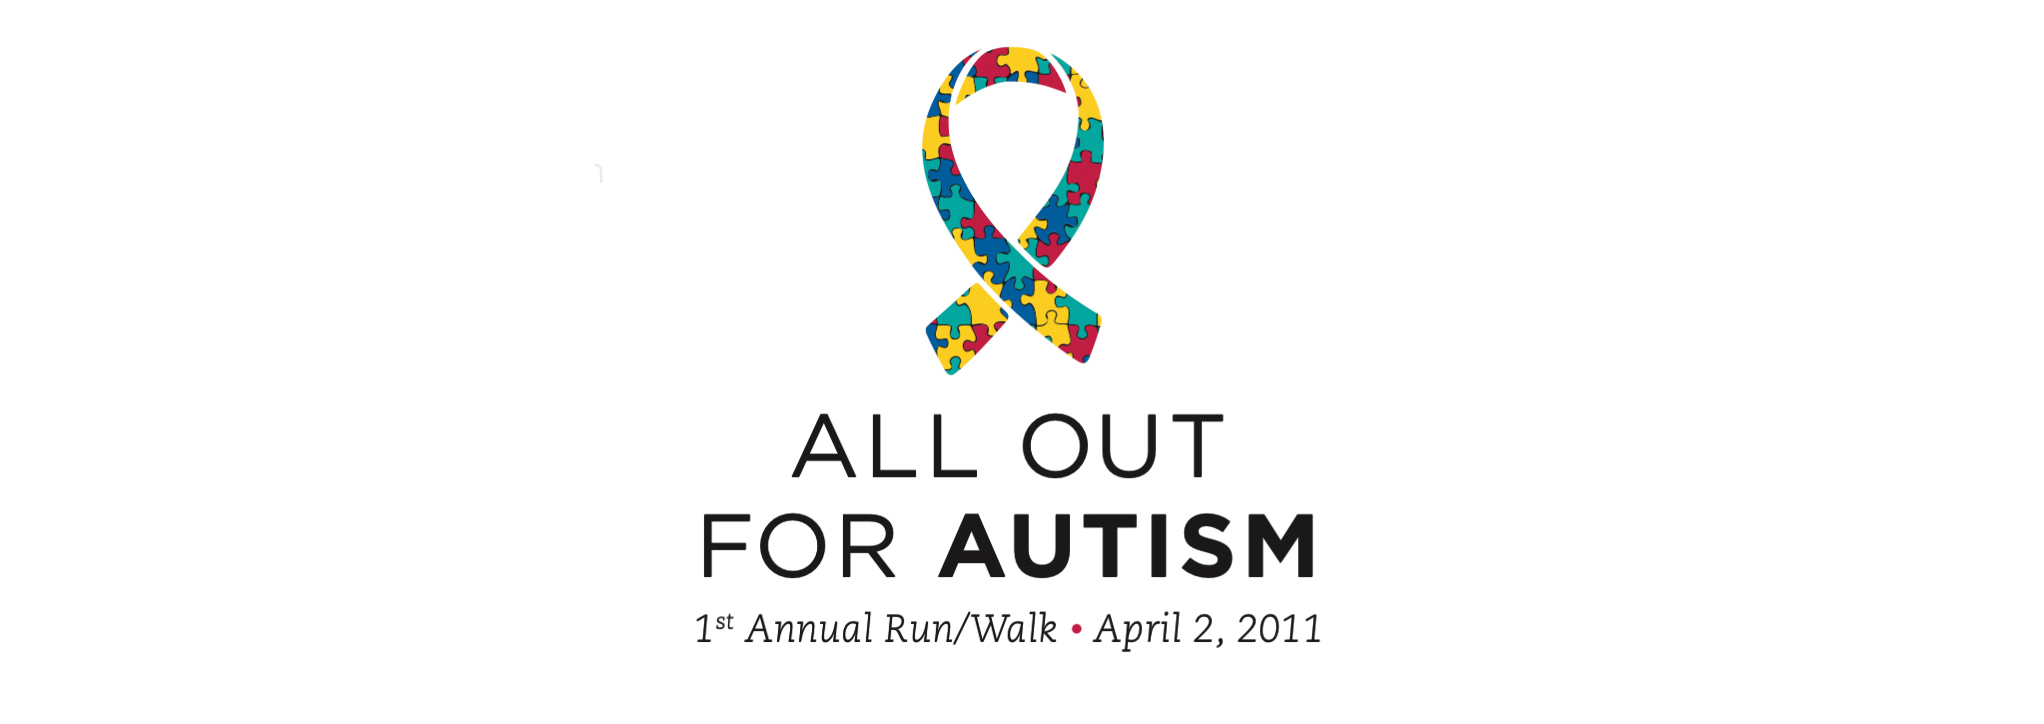 All Out for Autism Run/Walk Logo